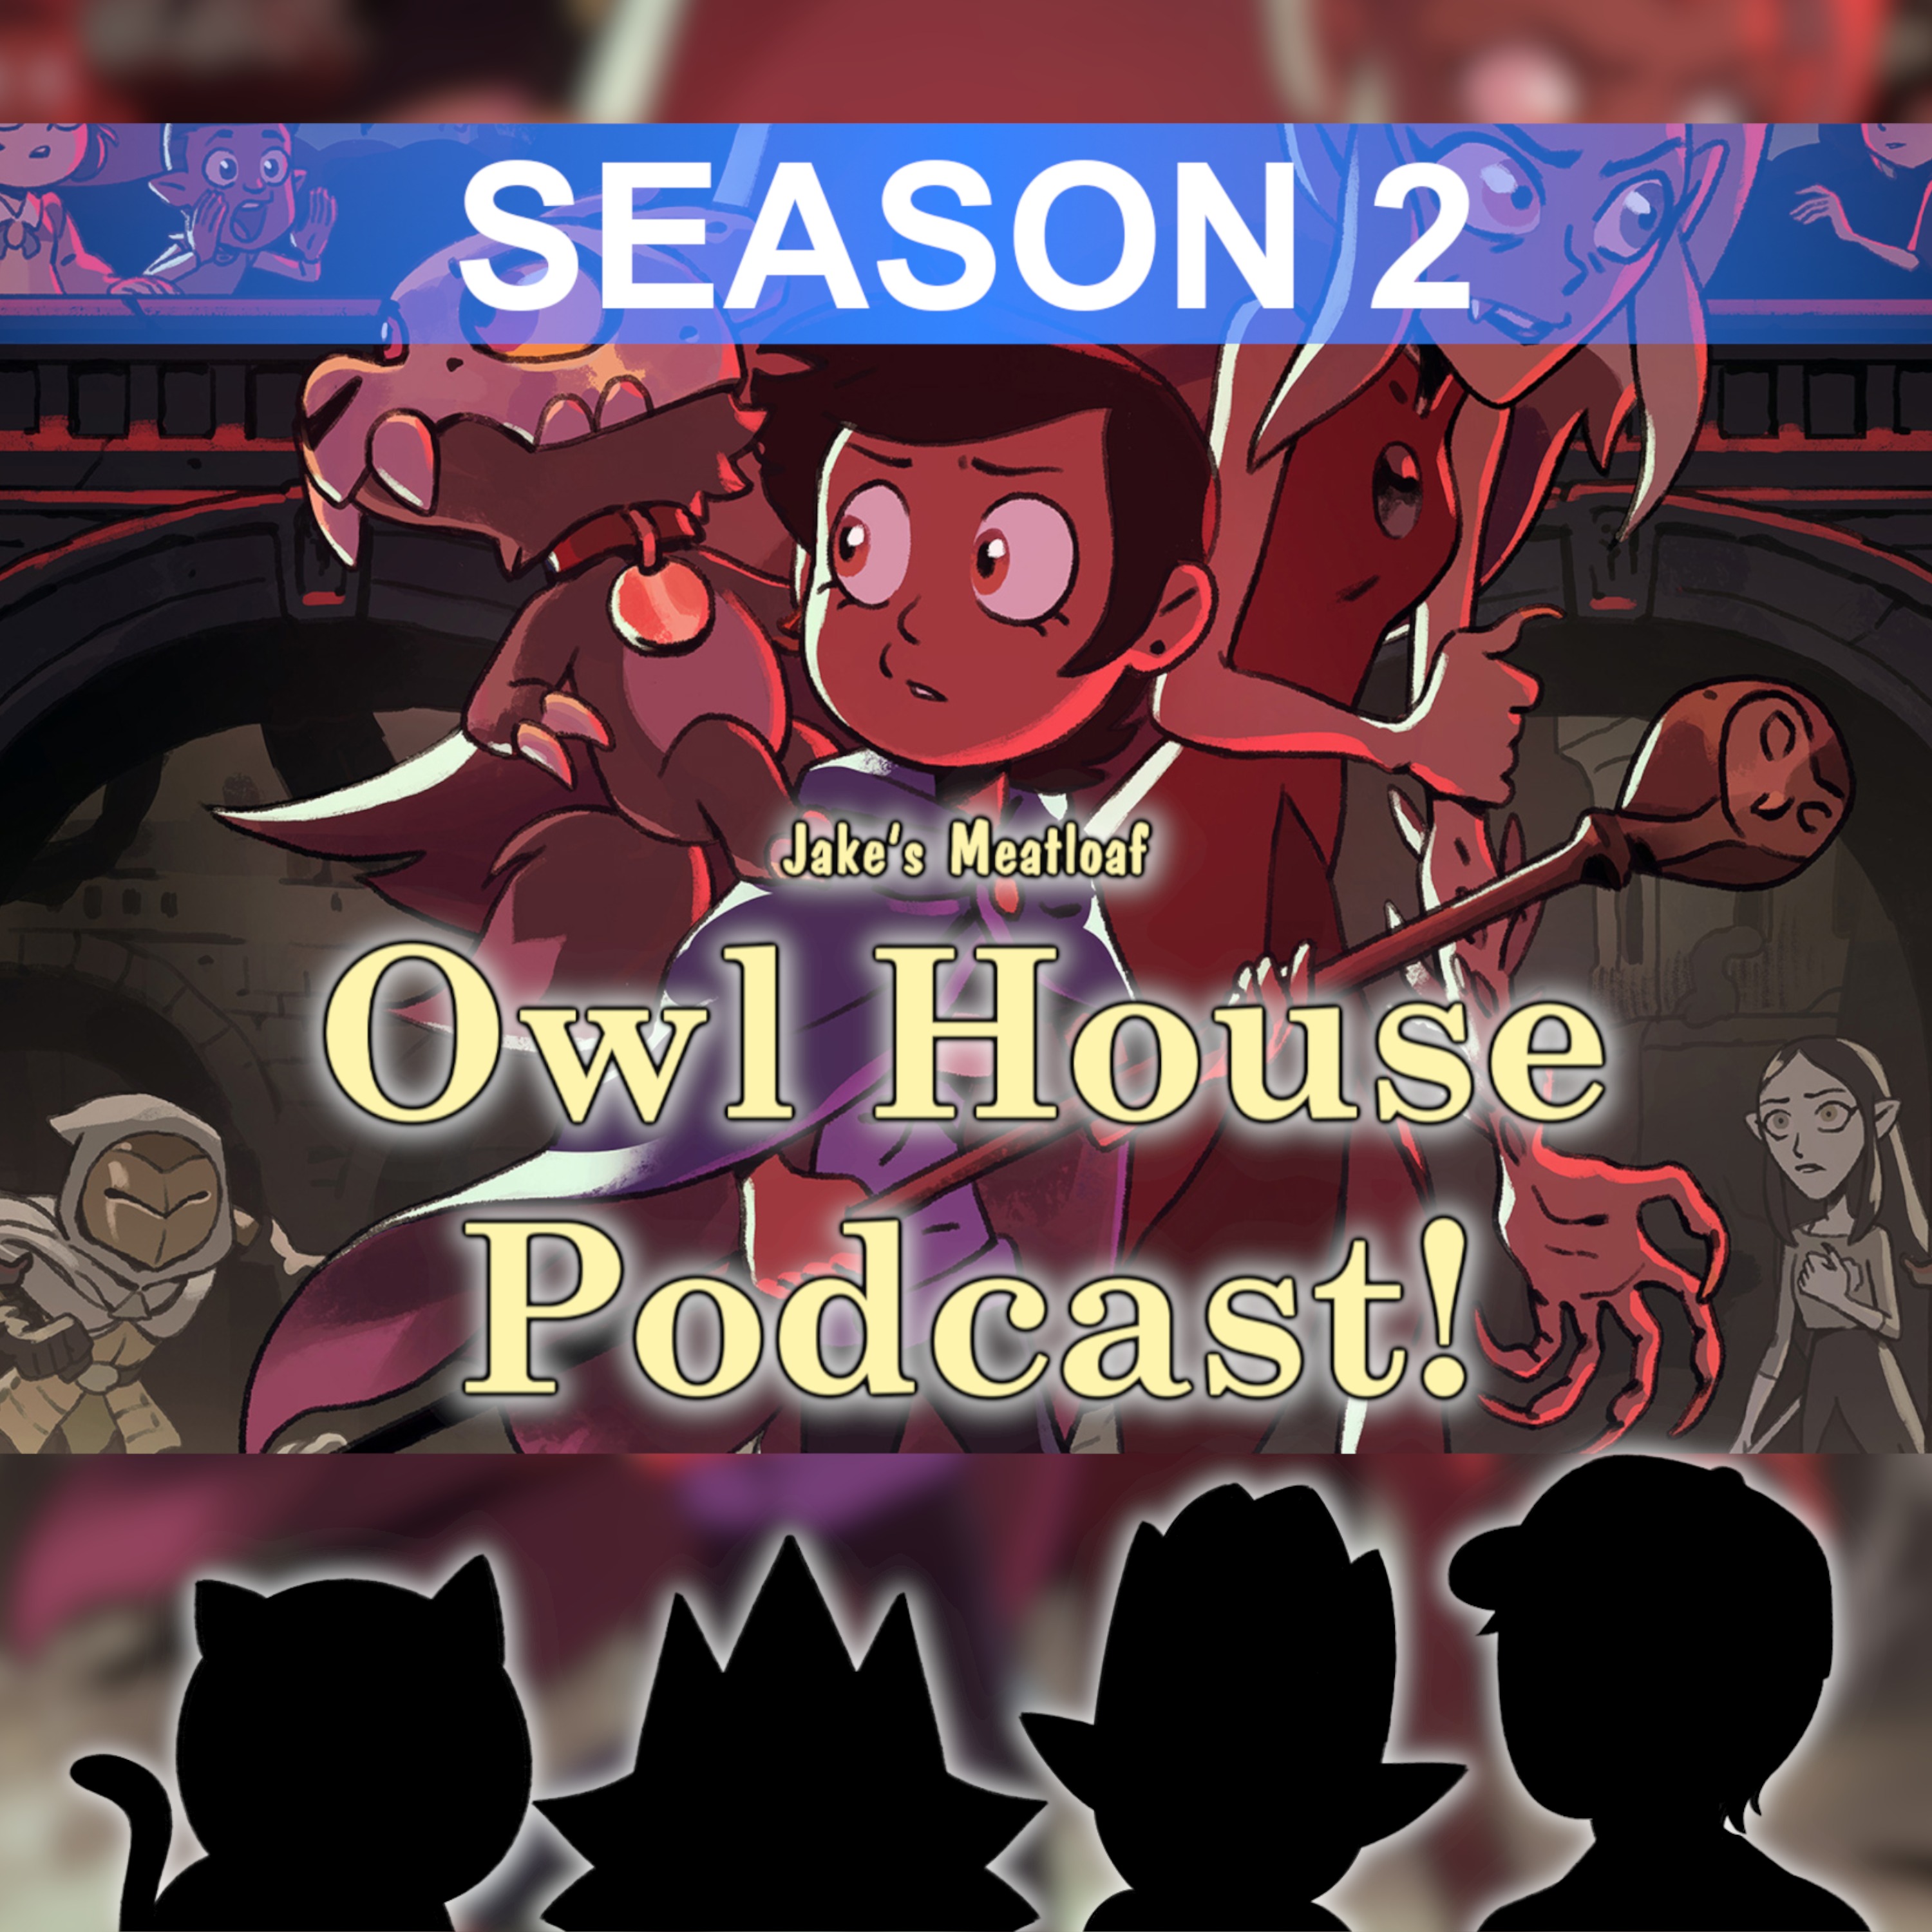 The Owl House' Review: Season 2 Episode 12 Elsewhere and Elsewhen